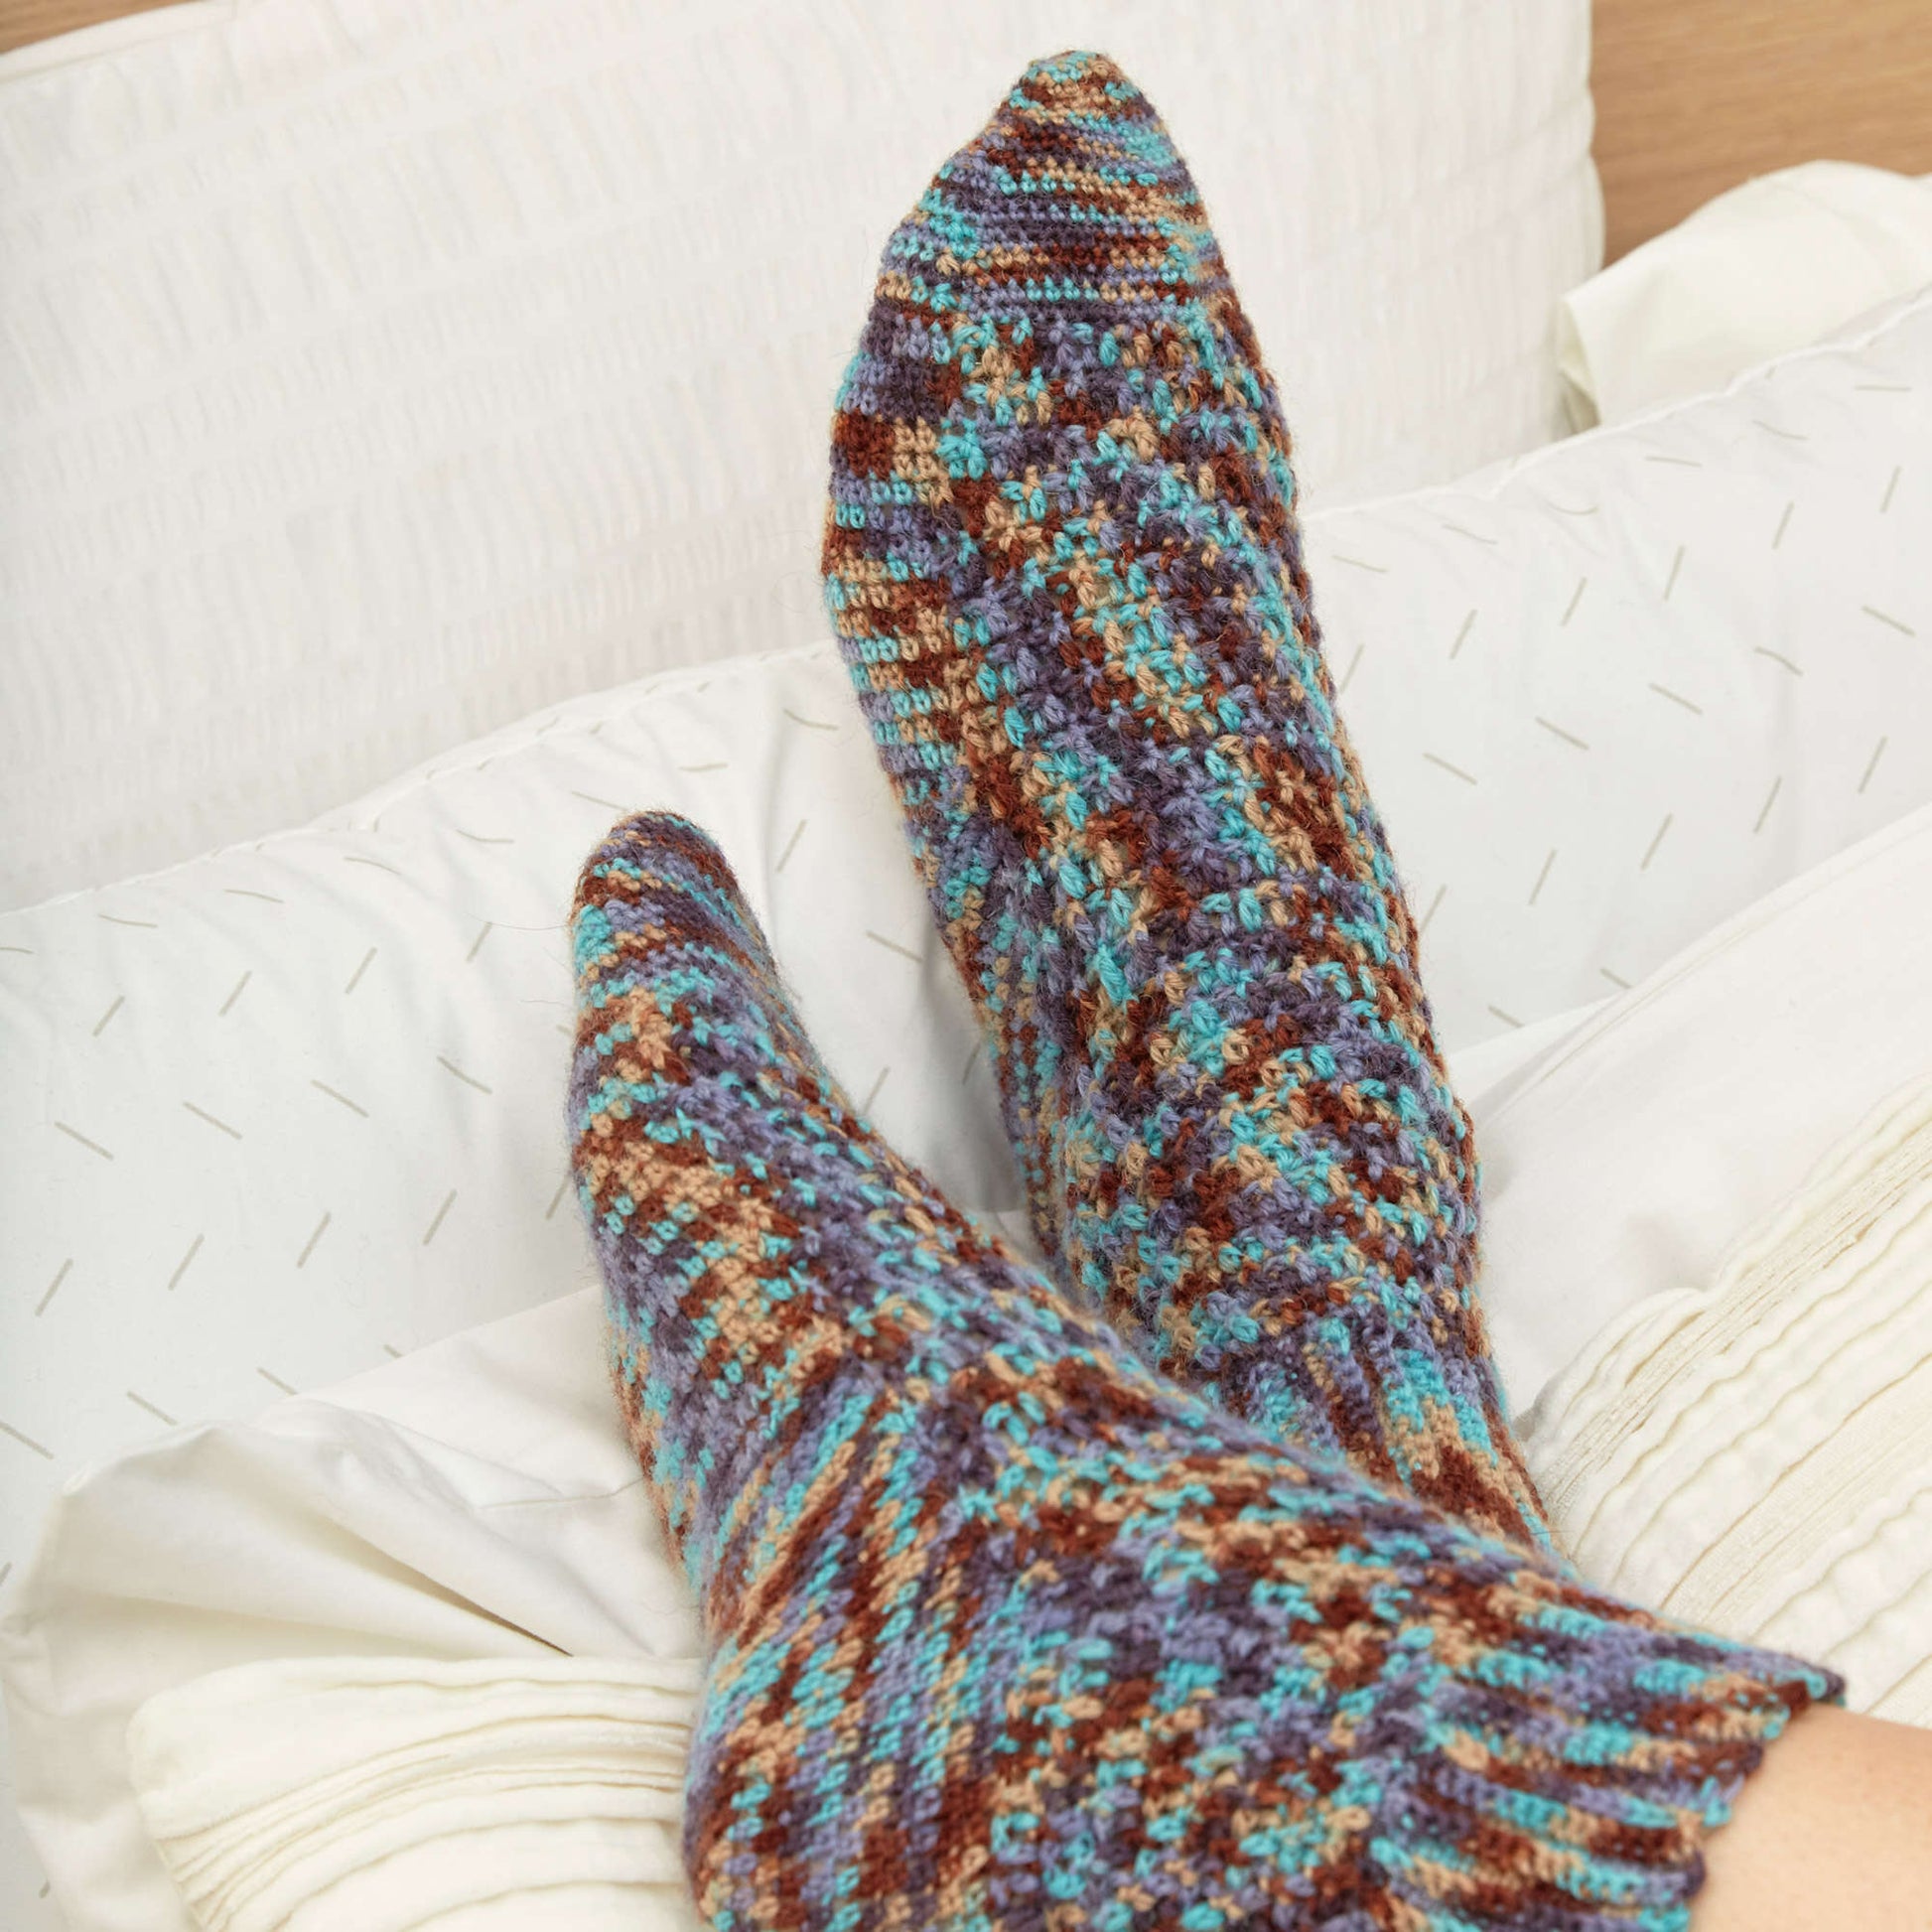 Free Red Heart Surf And Sand Socks Crochet Pattern